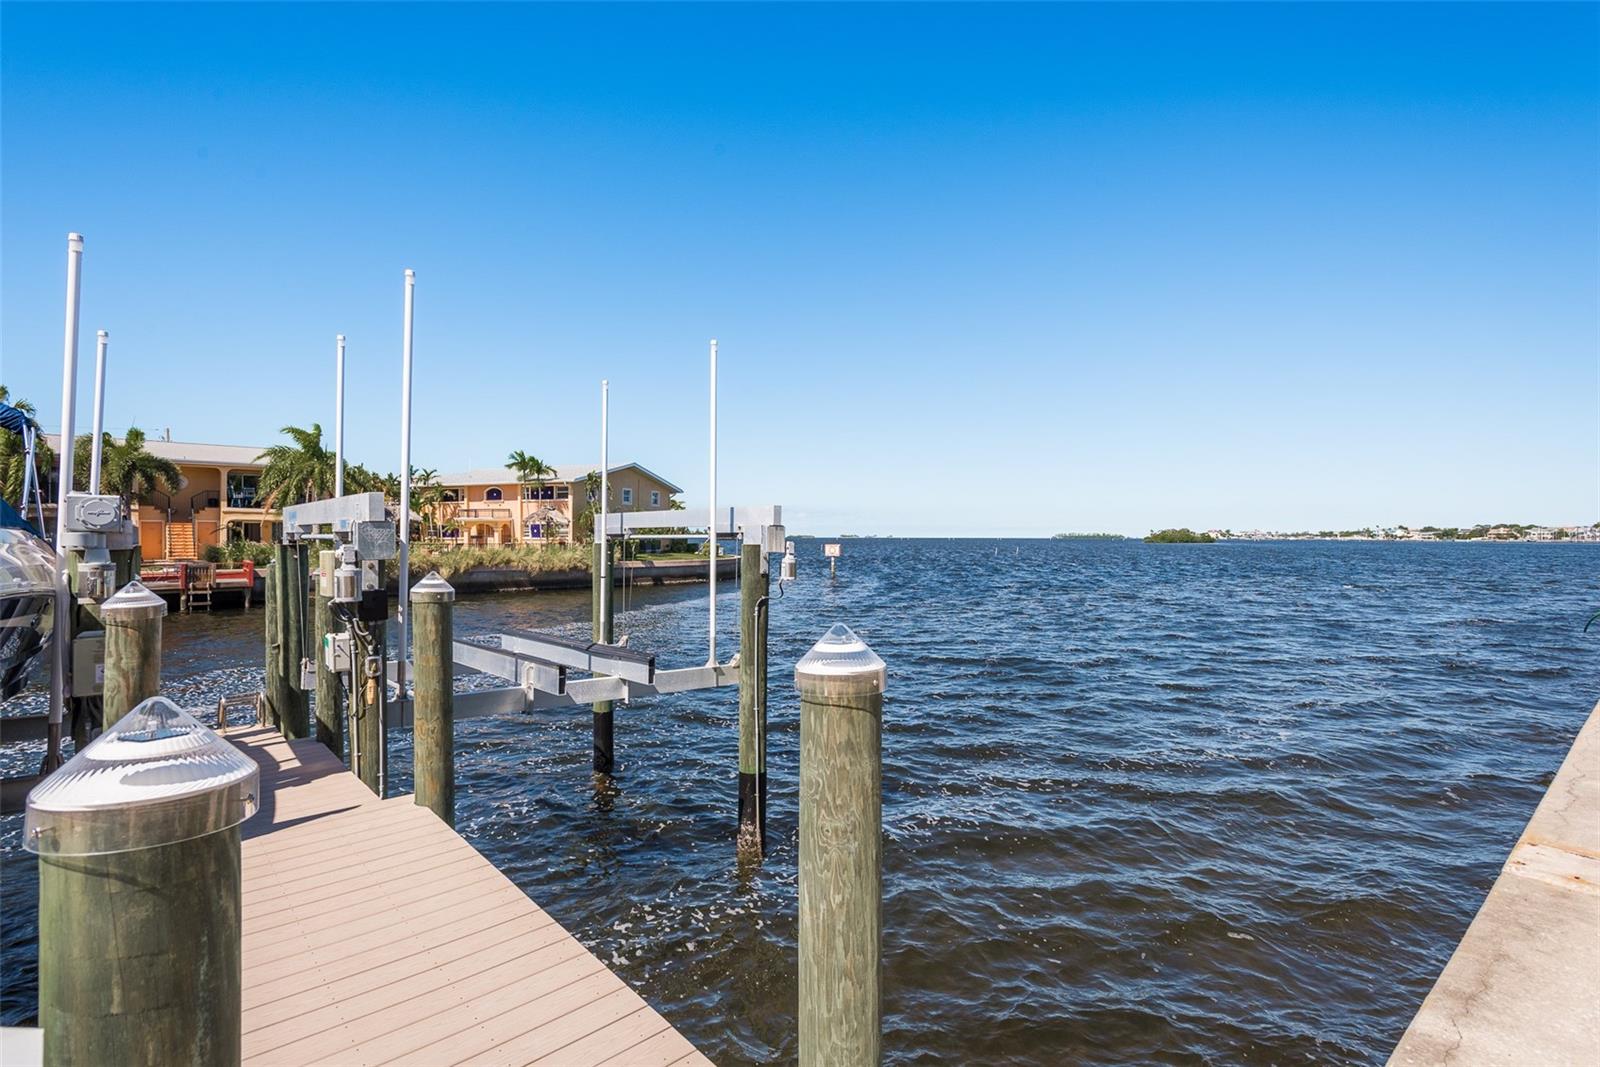 Enjoy direct deep water access from your private dock, opening up a world of maritime exploration and aquatic adventures right from the comfort of your coastal haven.